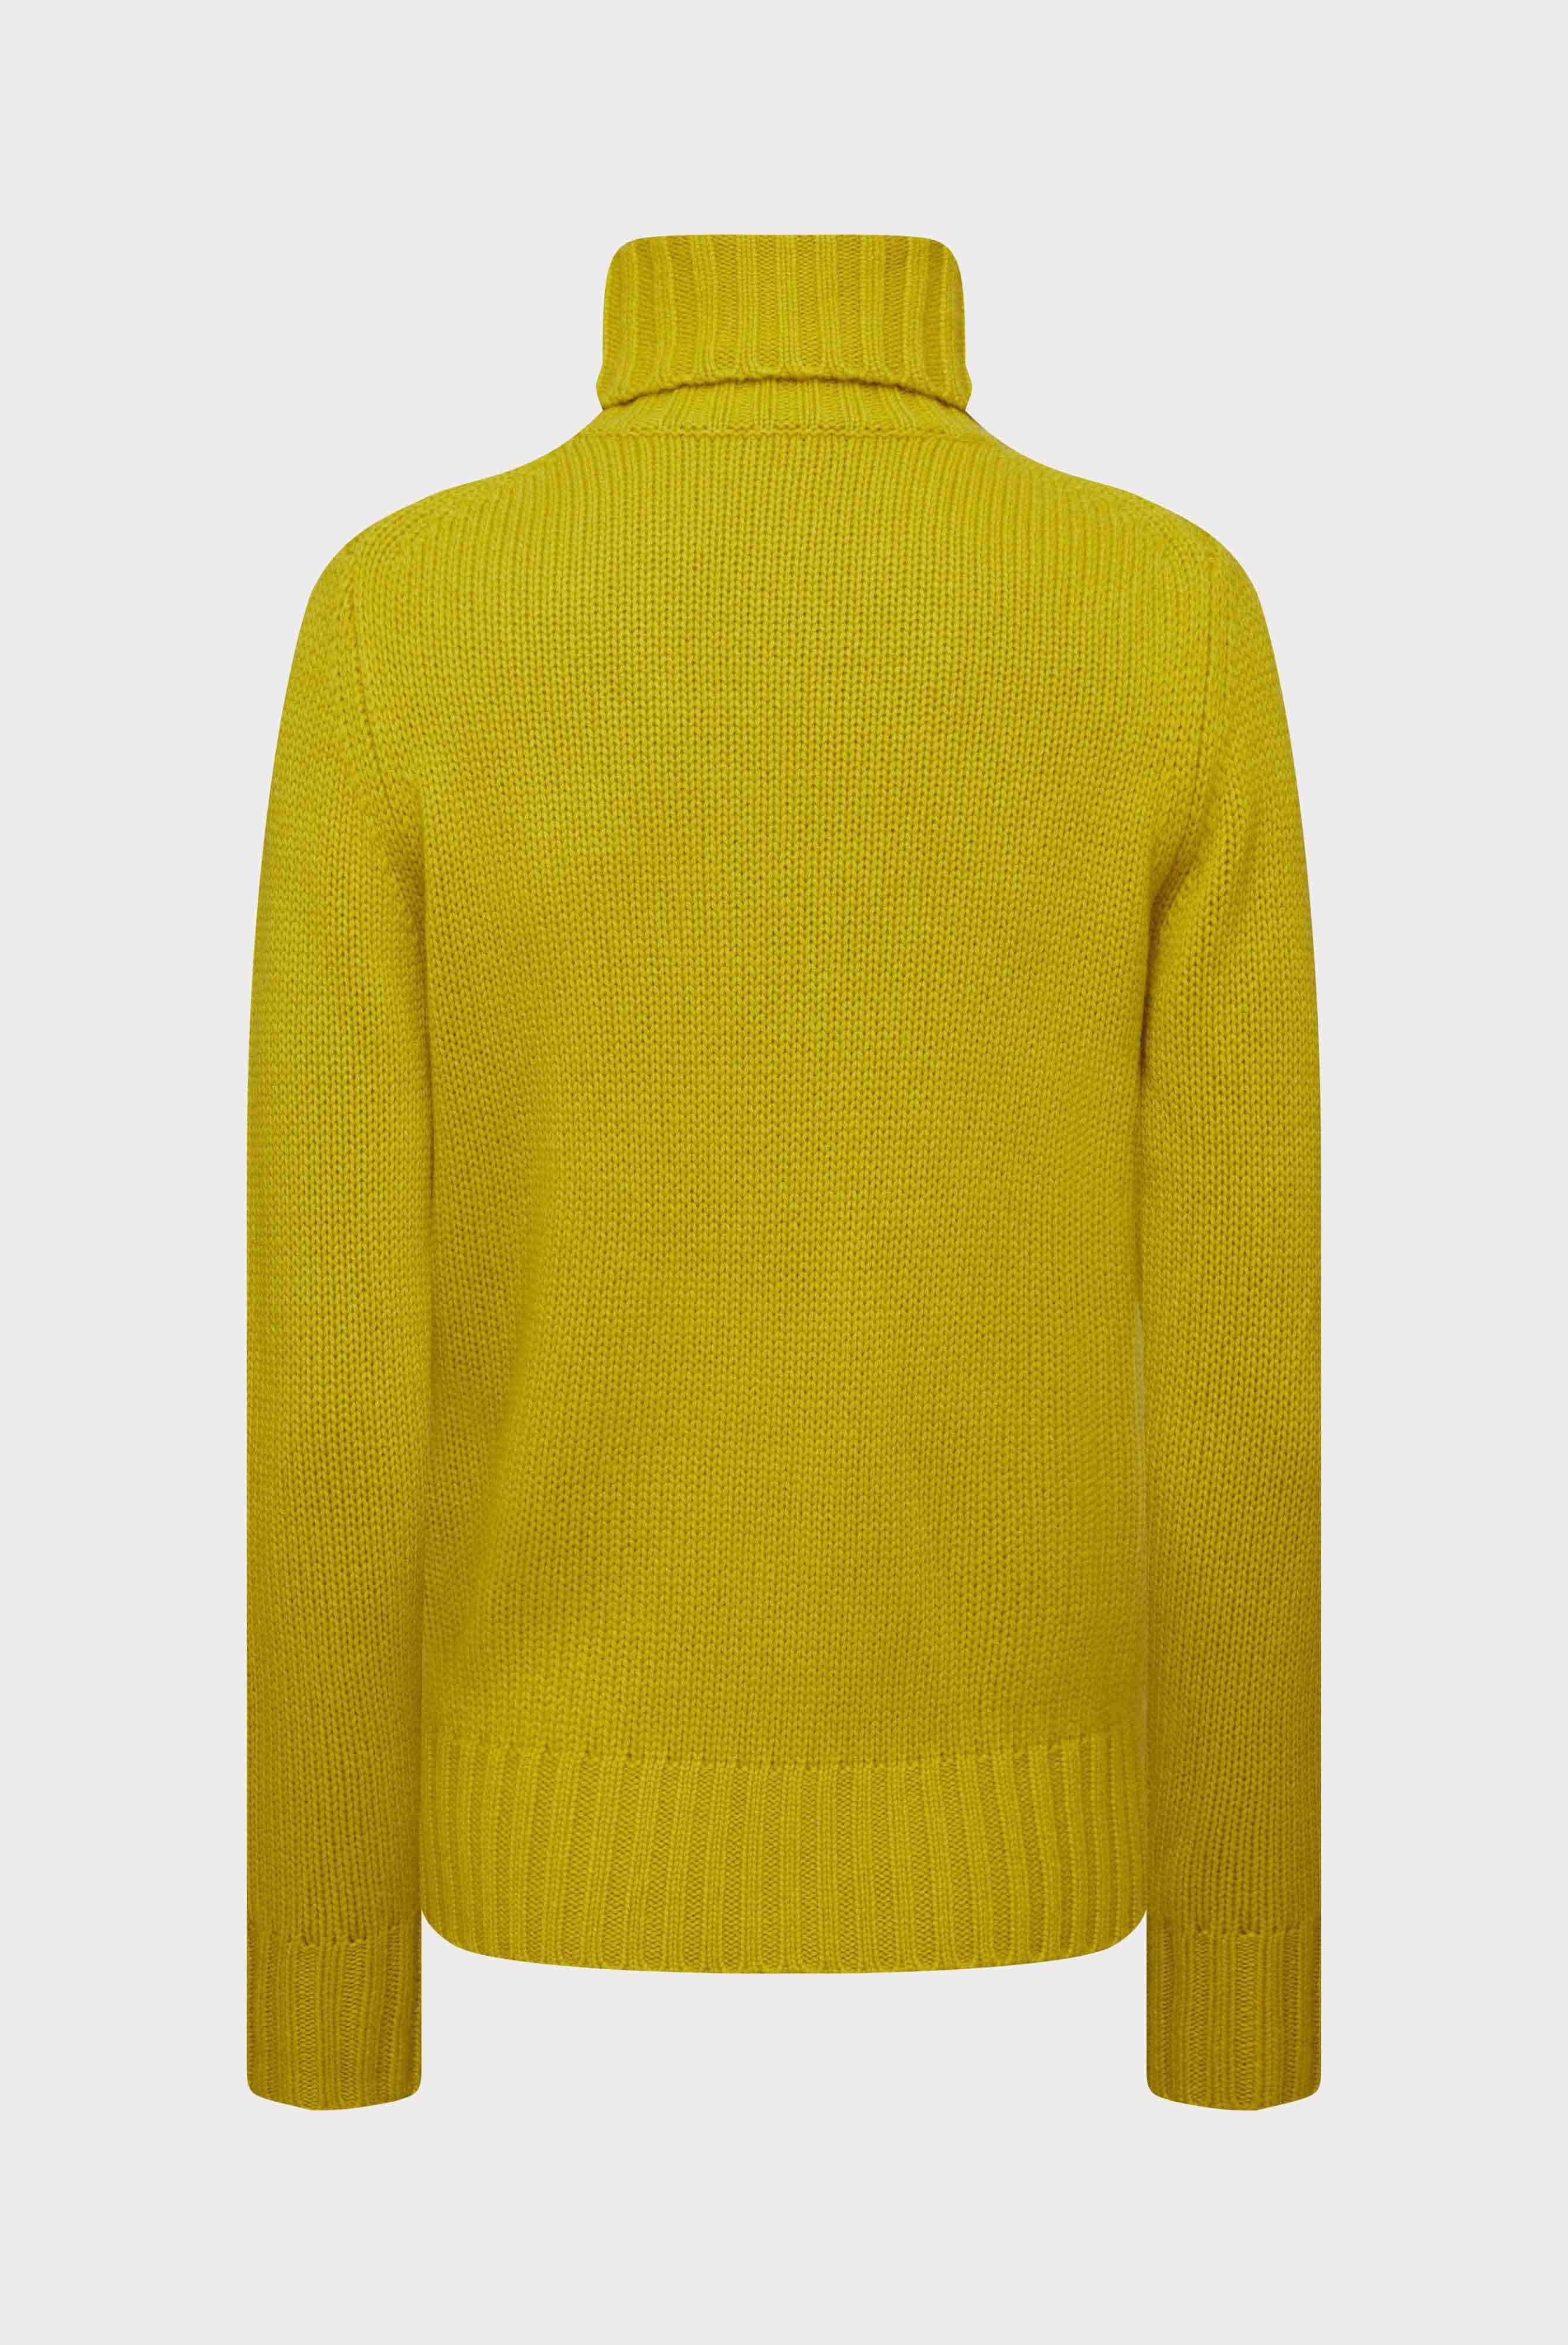 Sweaters & Cardigans+Turtleneck Cashmere Sweater+82.8640..S00235.230.M